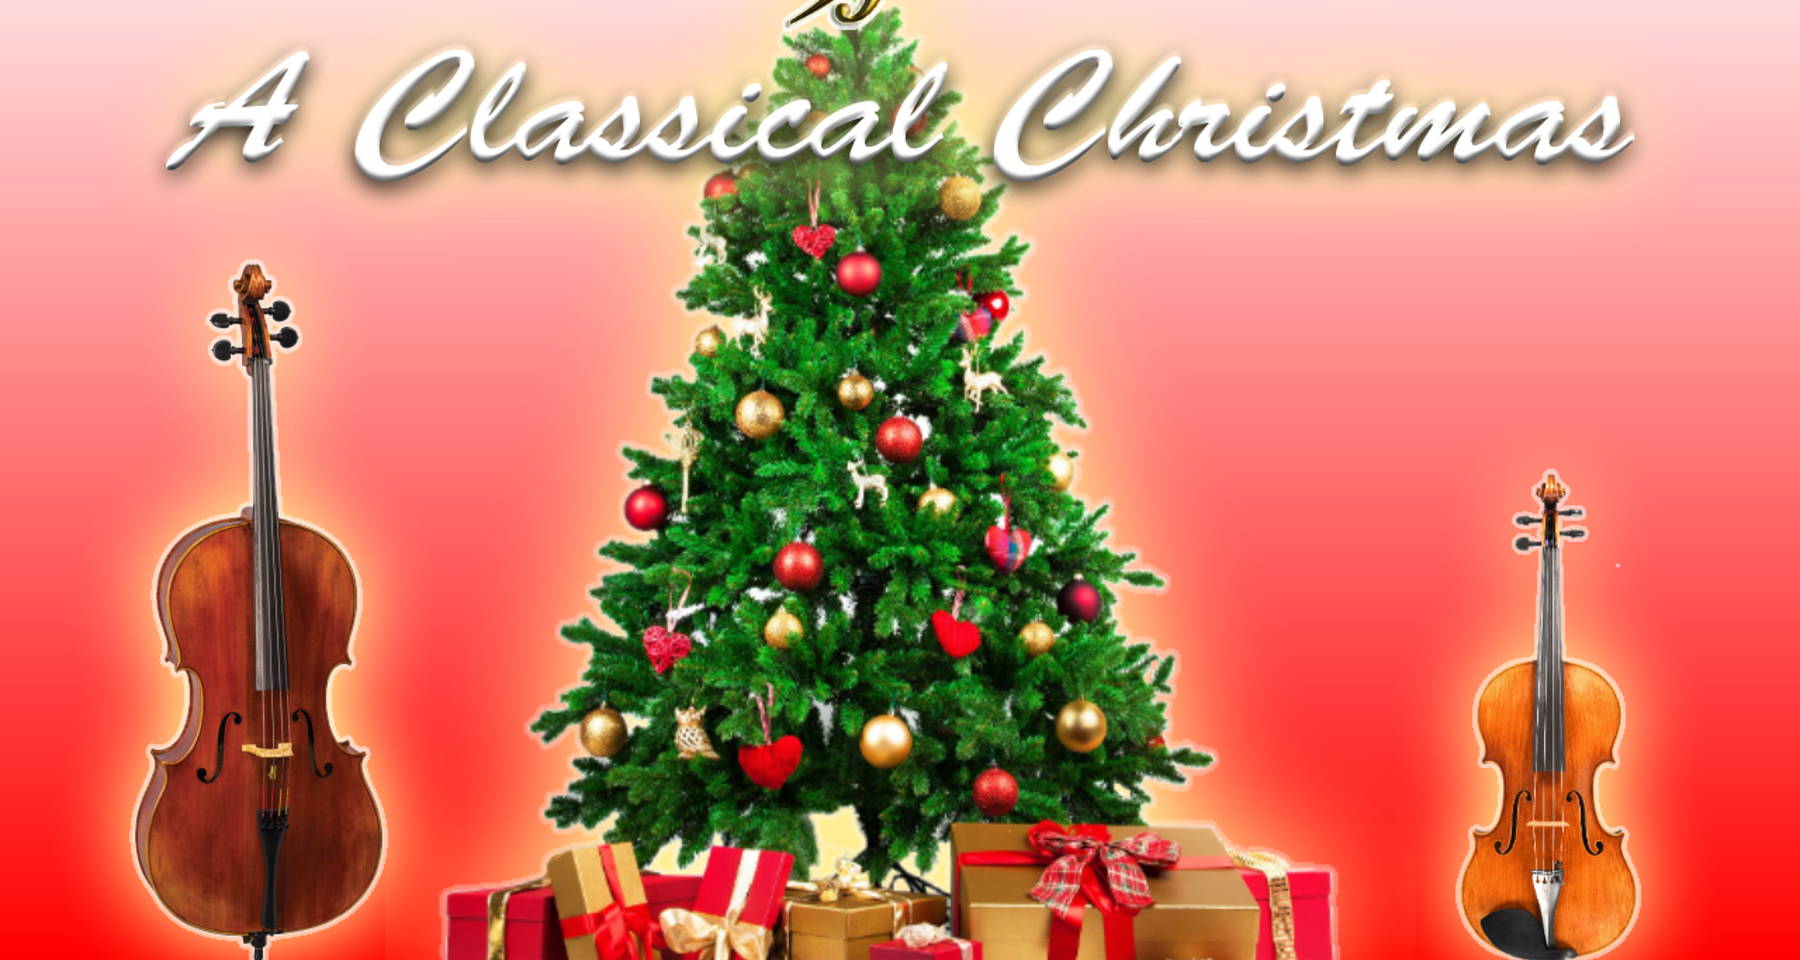 A Classical Christmas - Cello and Viola Duets